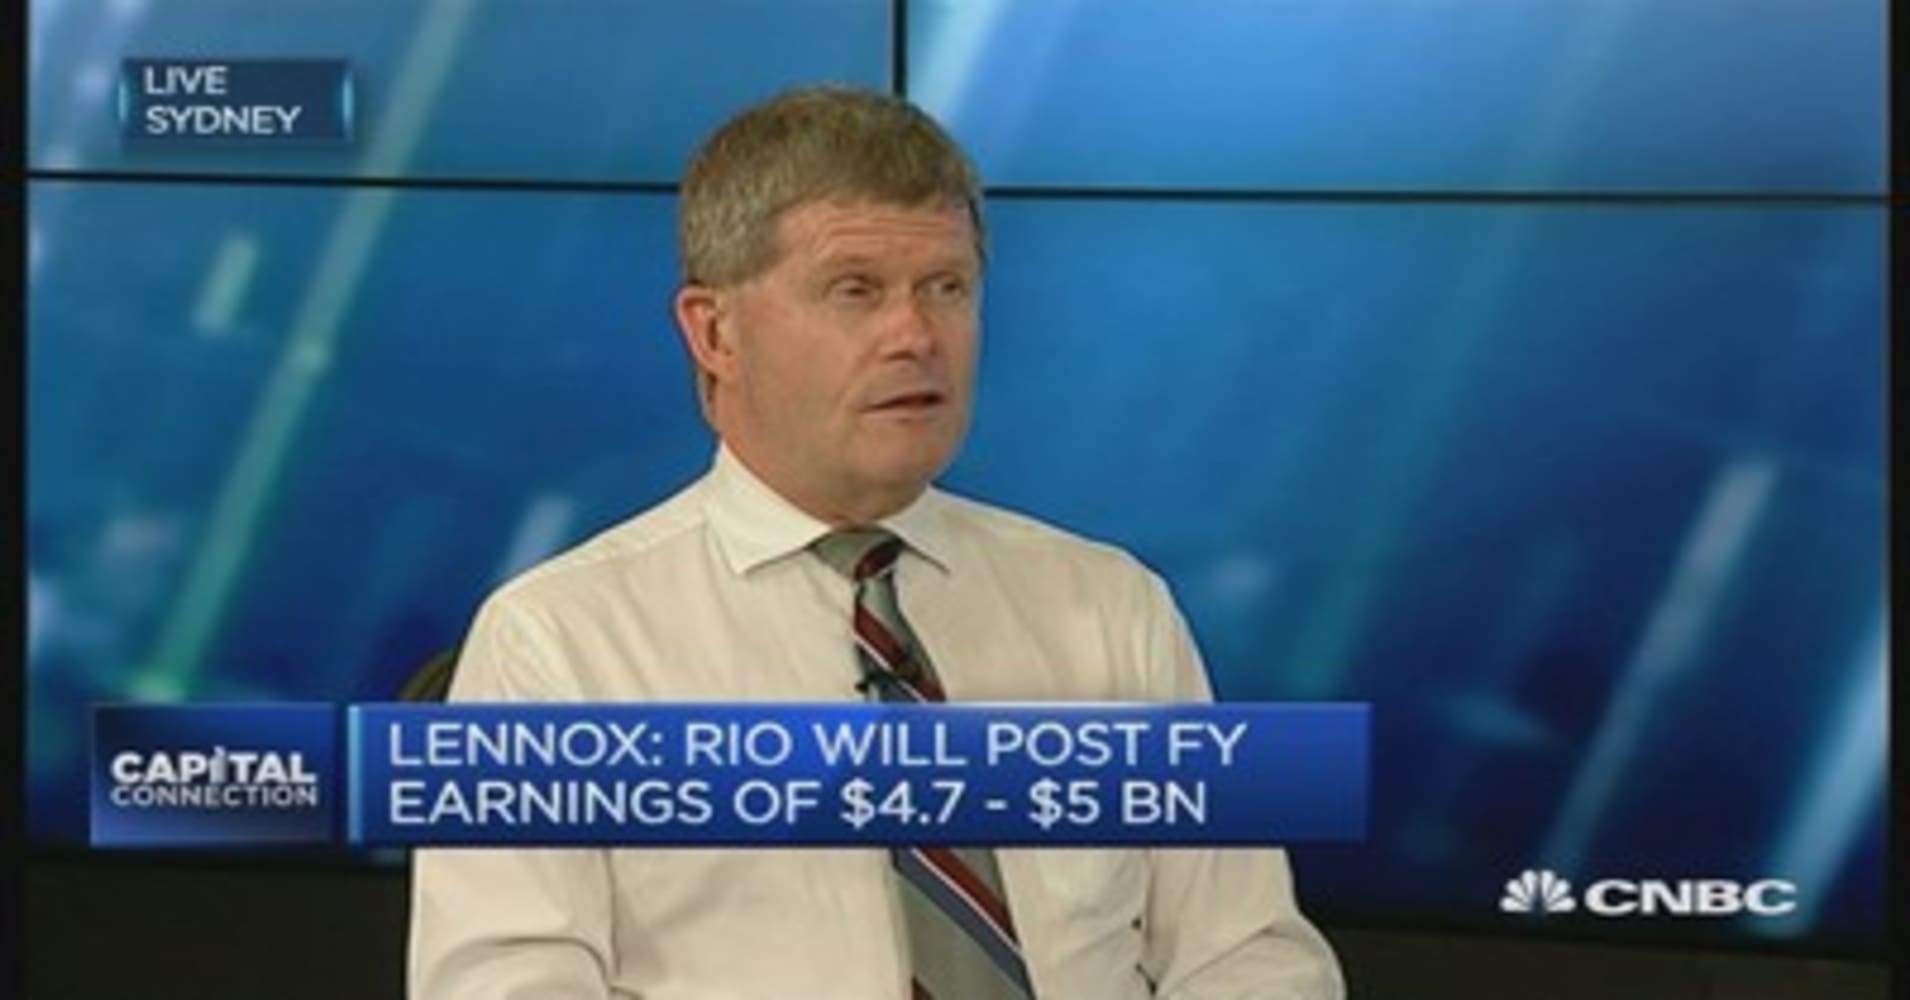 What to expect from Rio Tinto's earnings scorecard?